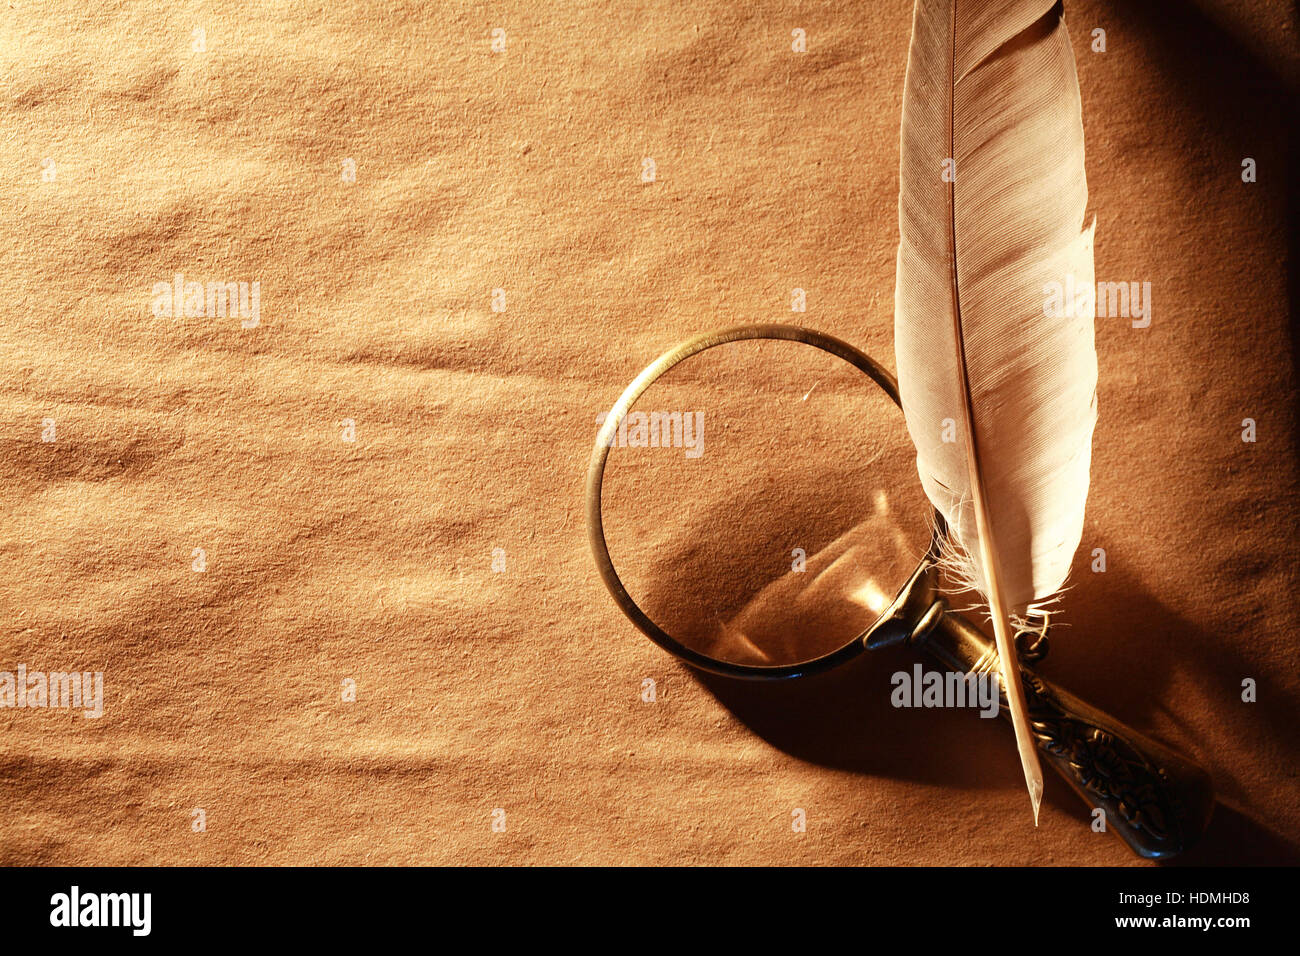 Art concept. Vintage magnifying glass near feather on nice old paper background Stock Photo